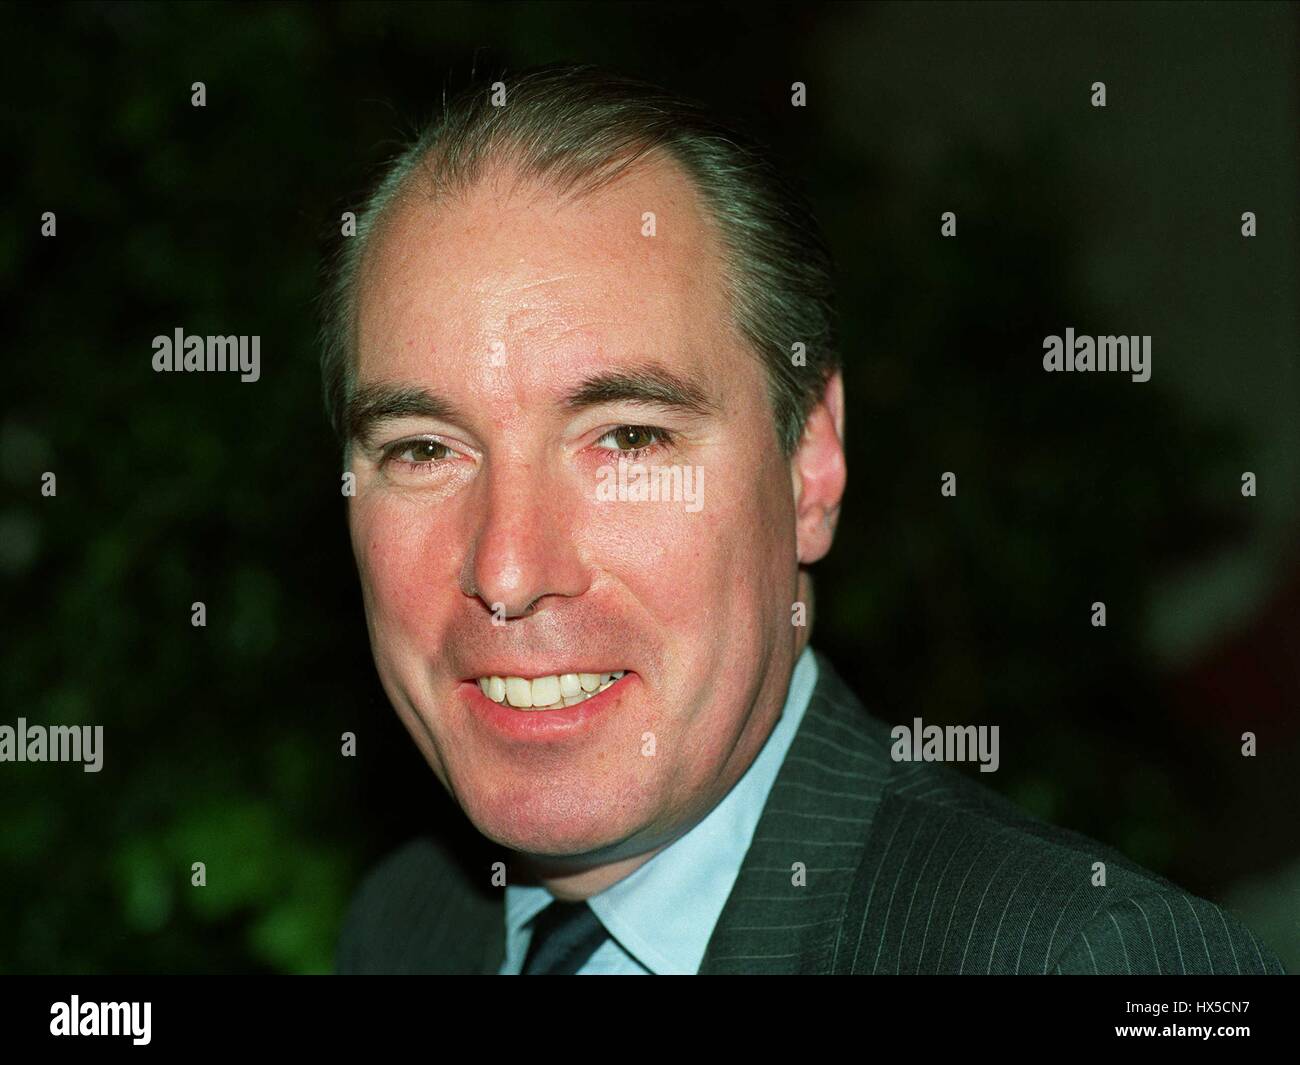 ROBERT ATKINS MP MINISTER FOR SPORT 04 June 1991 Stock Photo